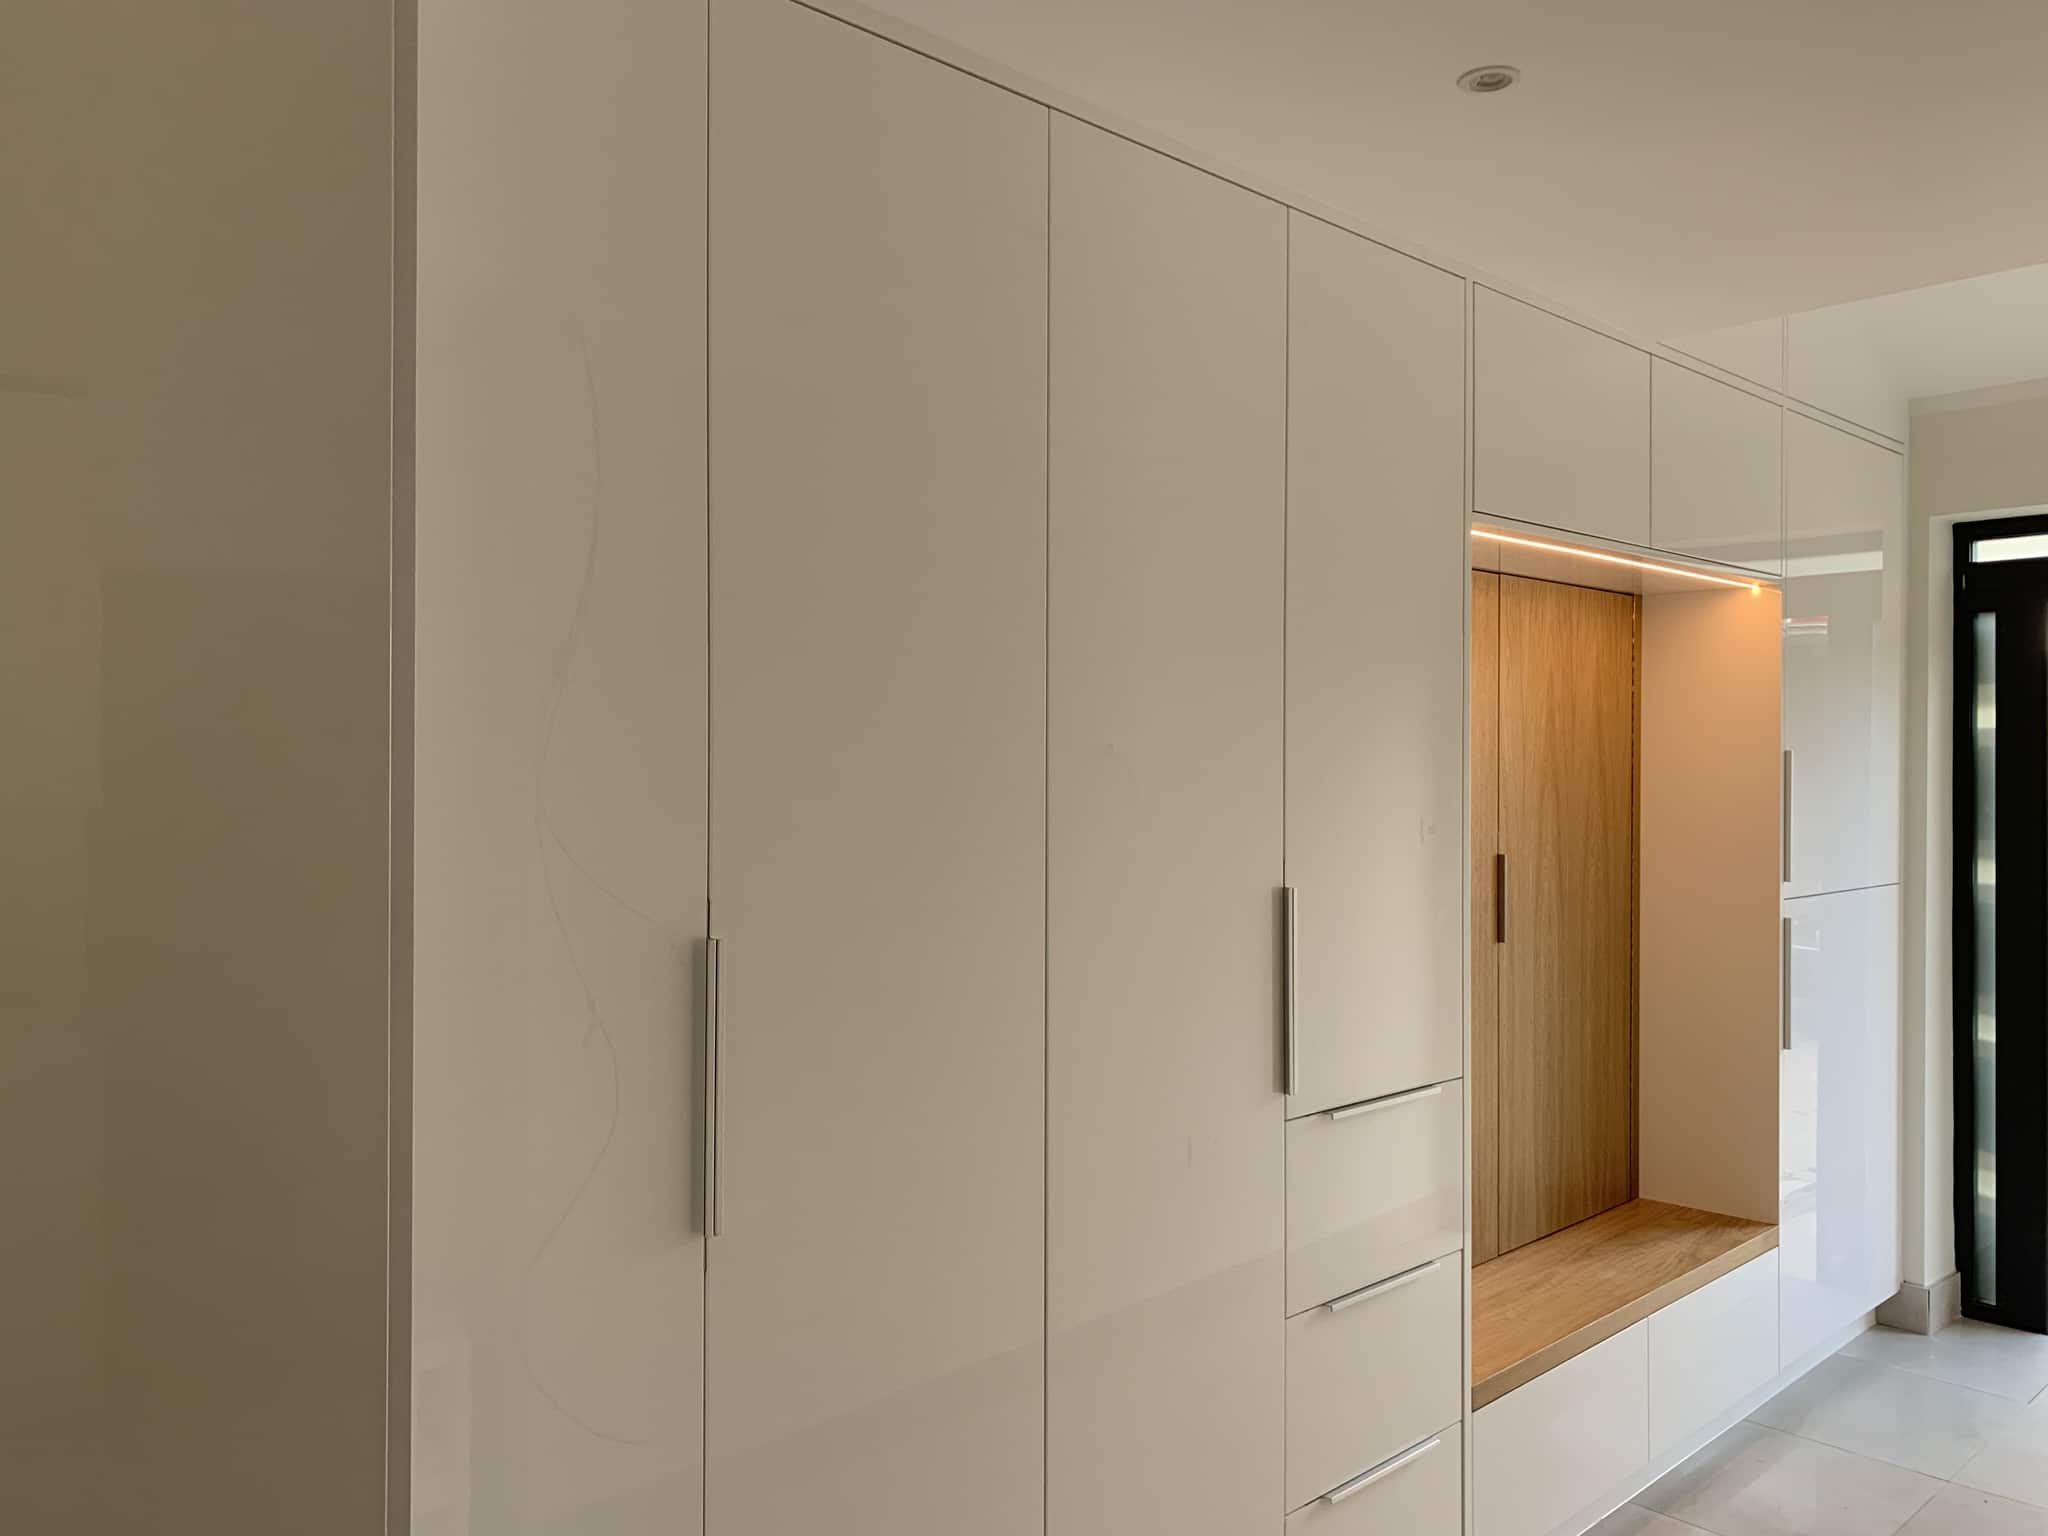 Hallway wardrobe in multi-storage room. Coat hang area with bench. White high gloss finish.